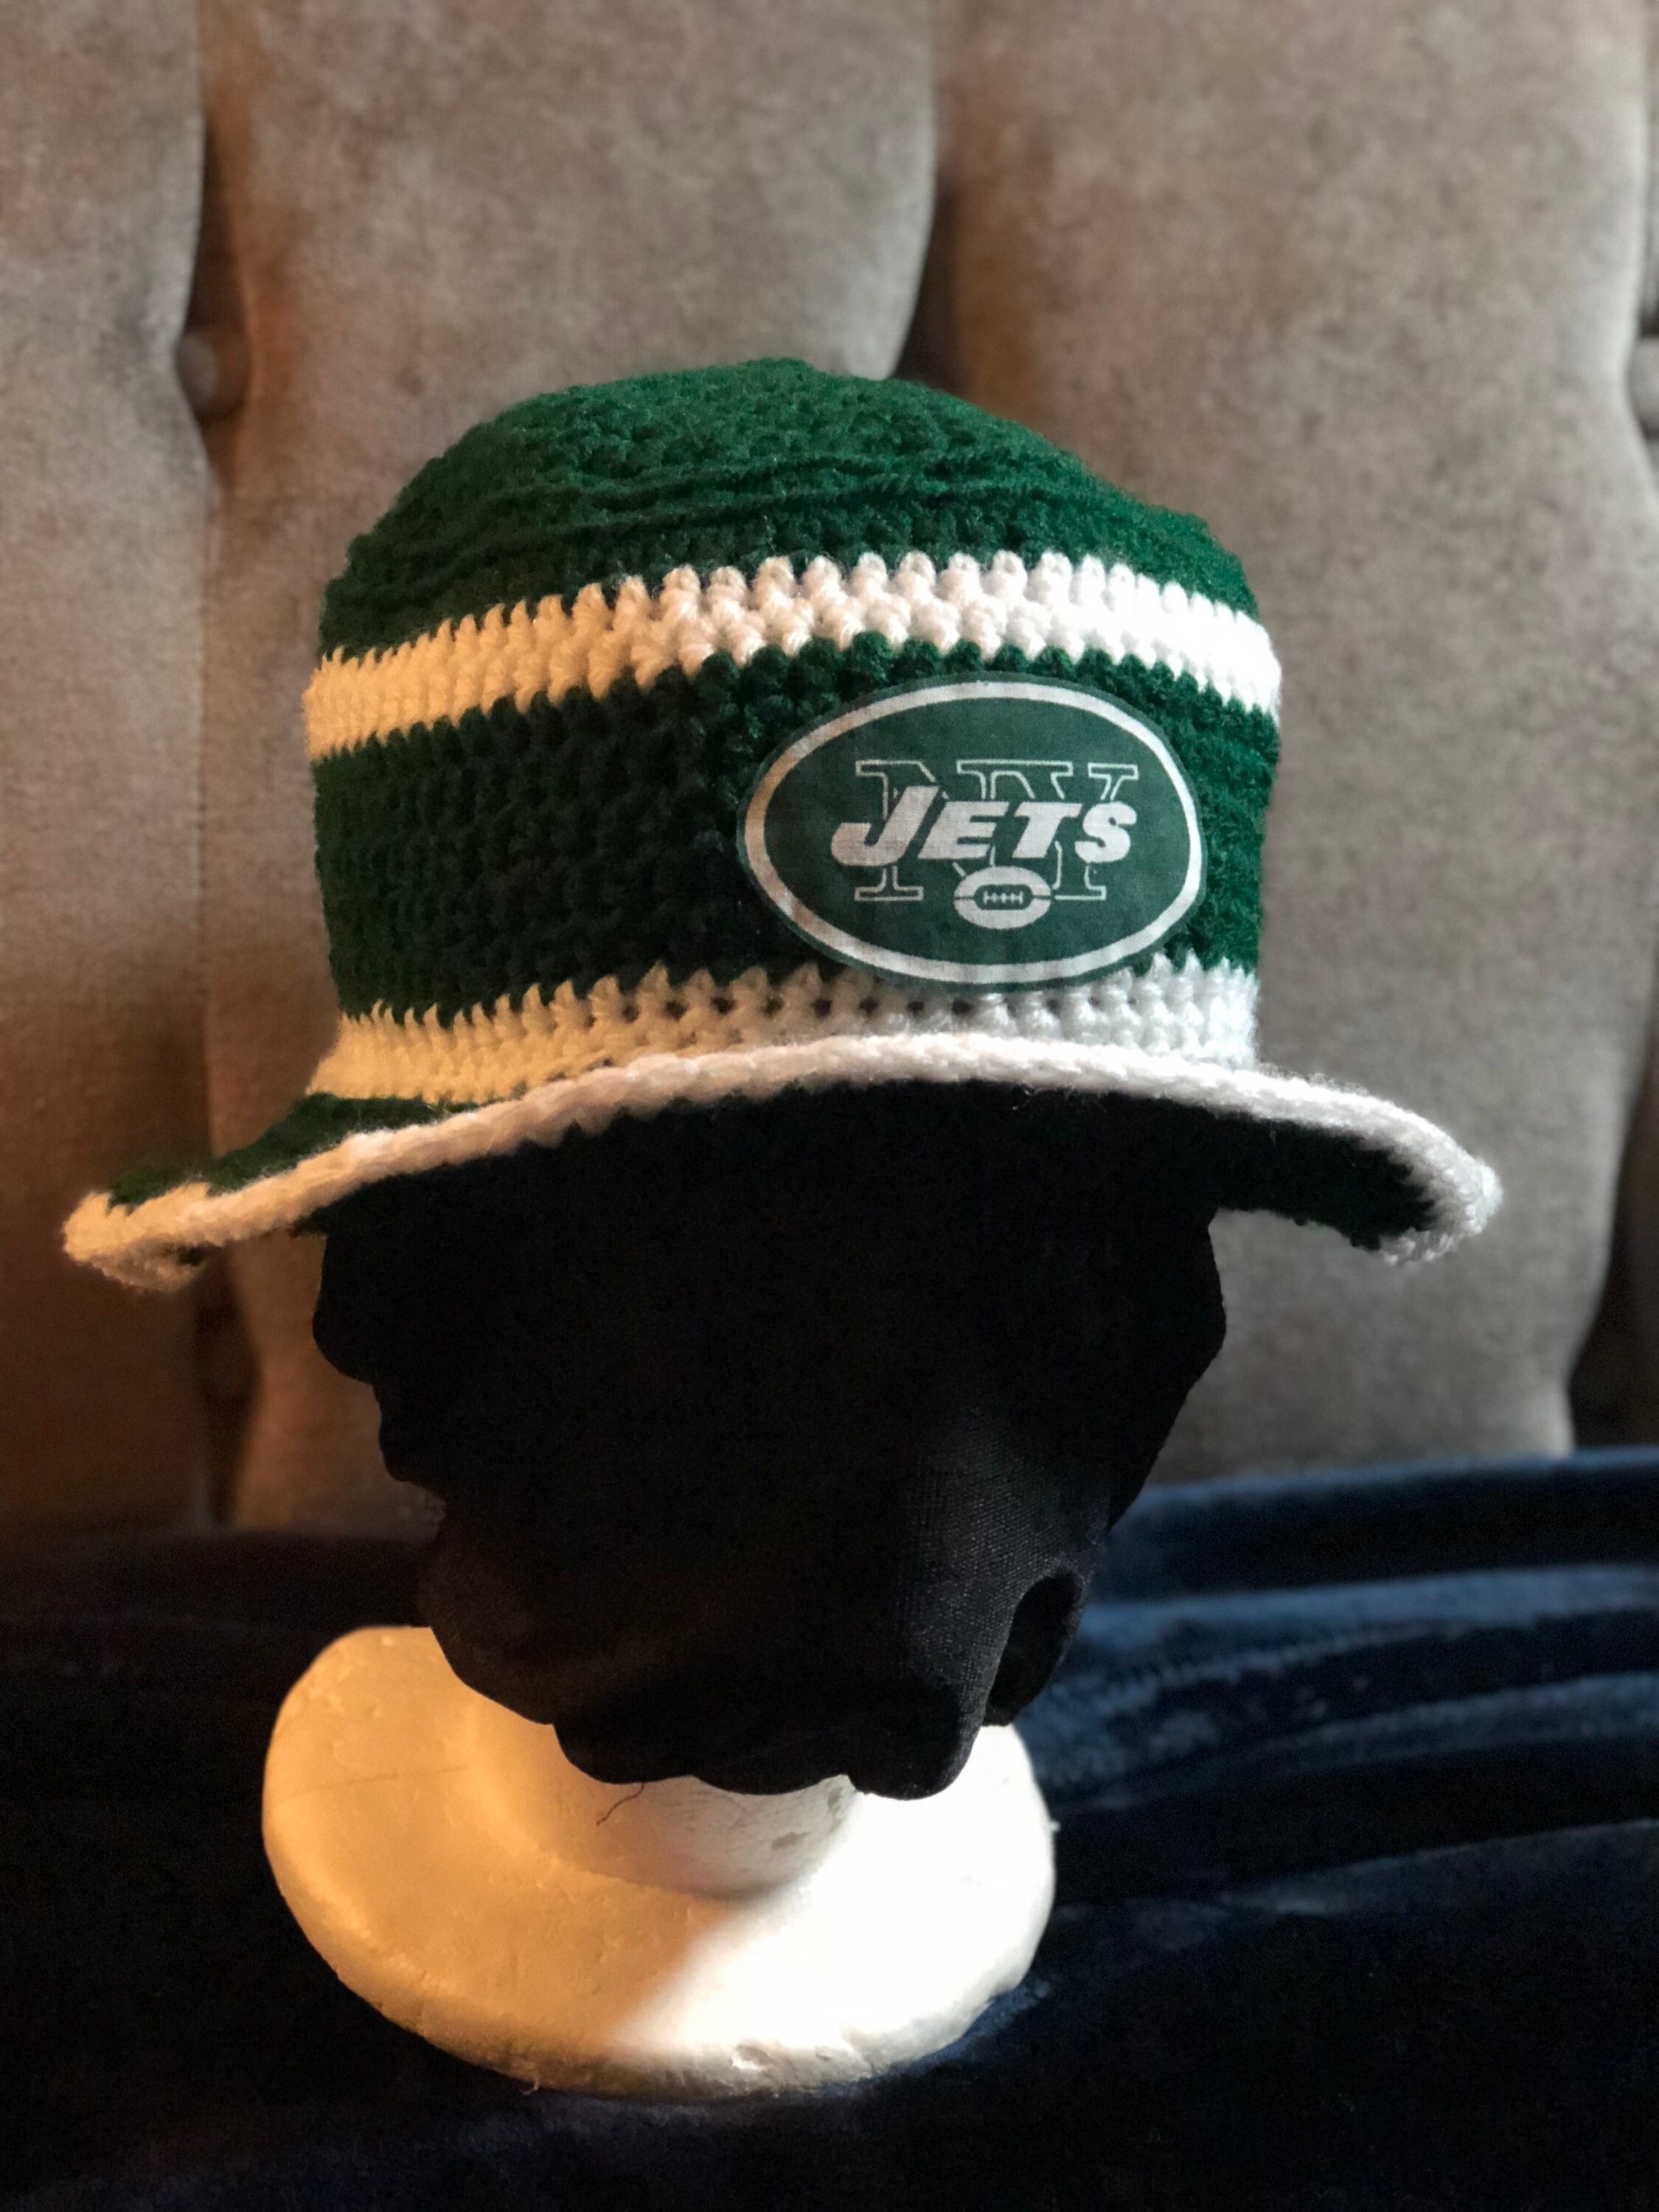 NFL Bucket Hat. New York Jets Bucket Hat. Green and White | Etsy